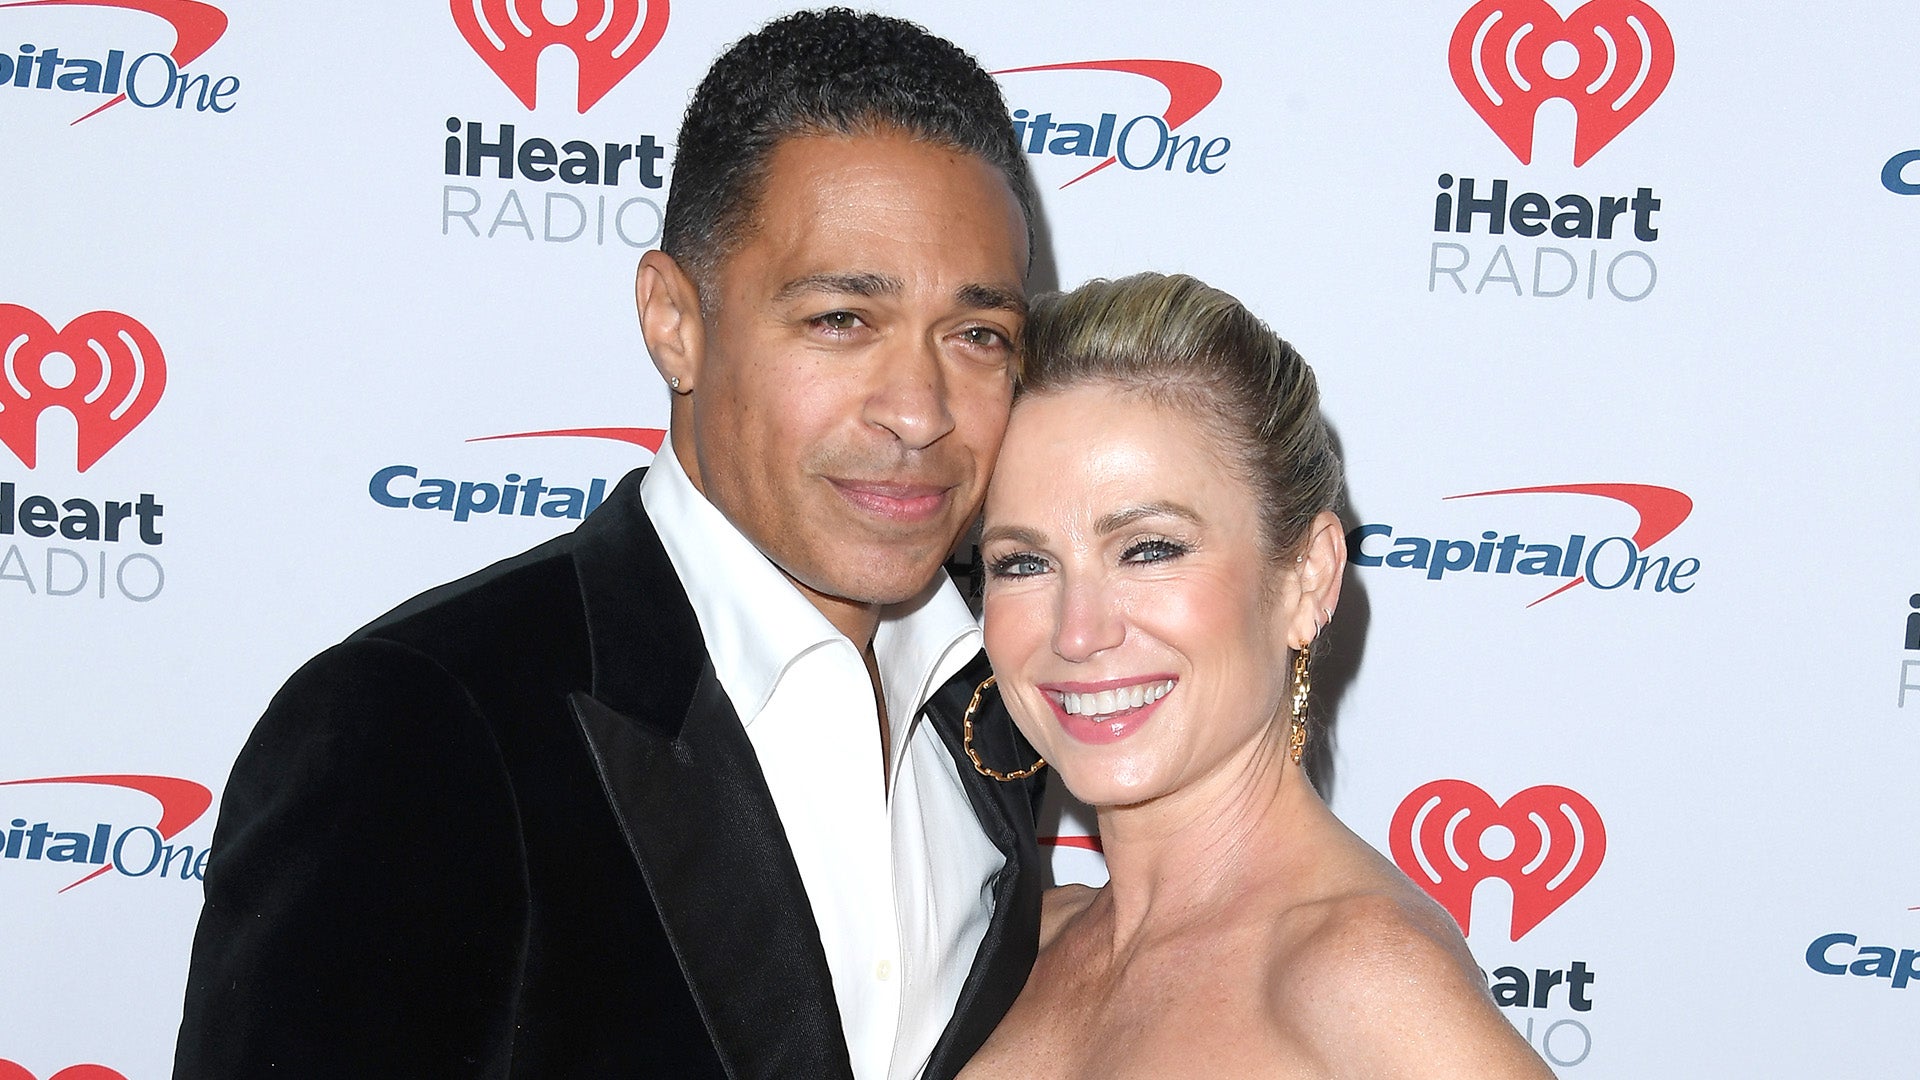 Amy Robach and T.J. Holmes's Exes Dating After Dual Divorces! (Source)